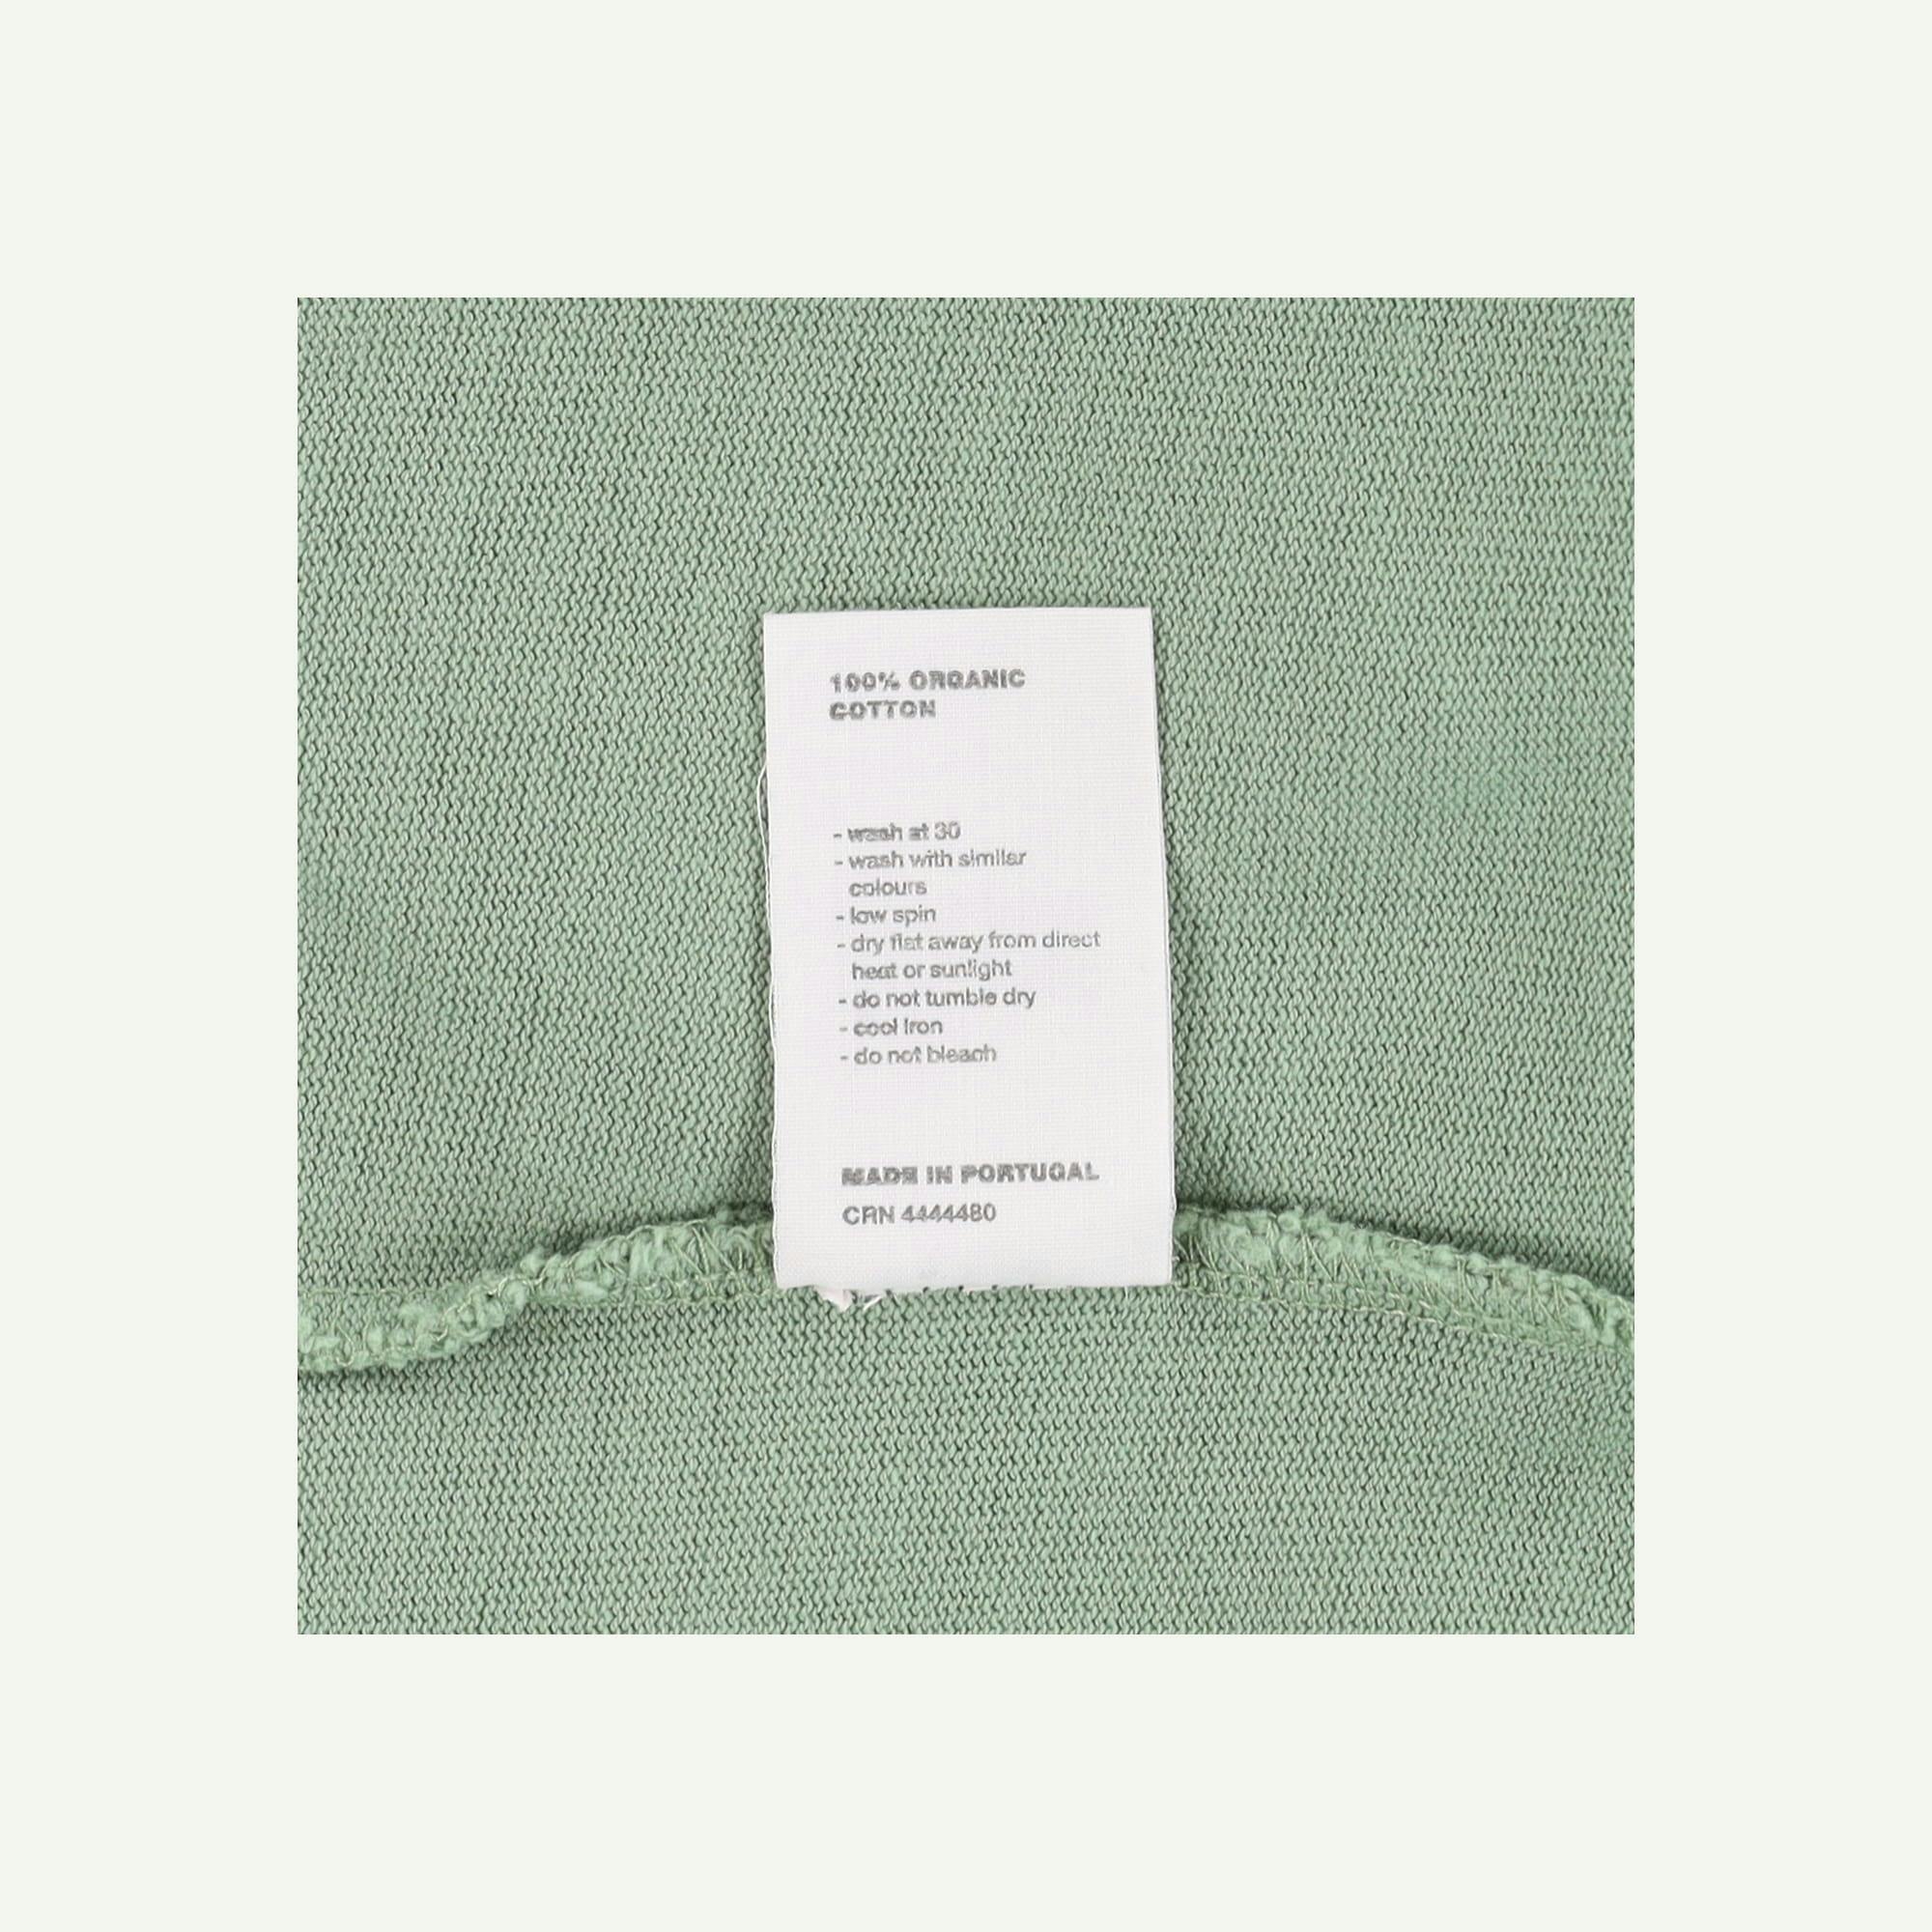 Finisterre Repaired Green T-Shirt